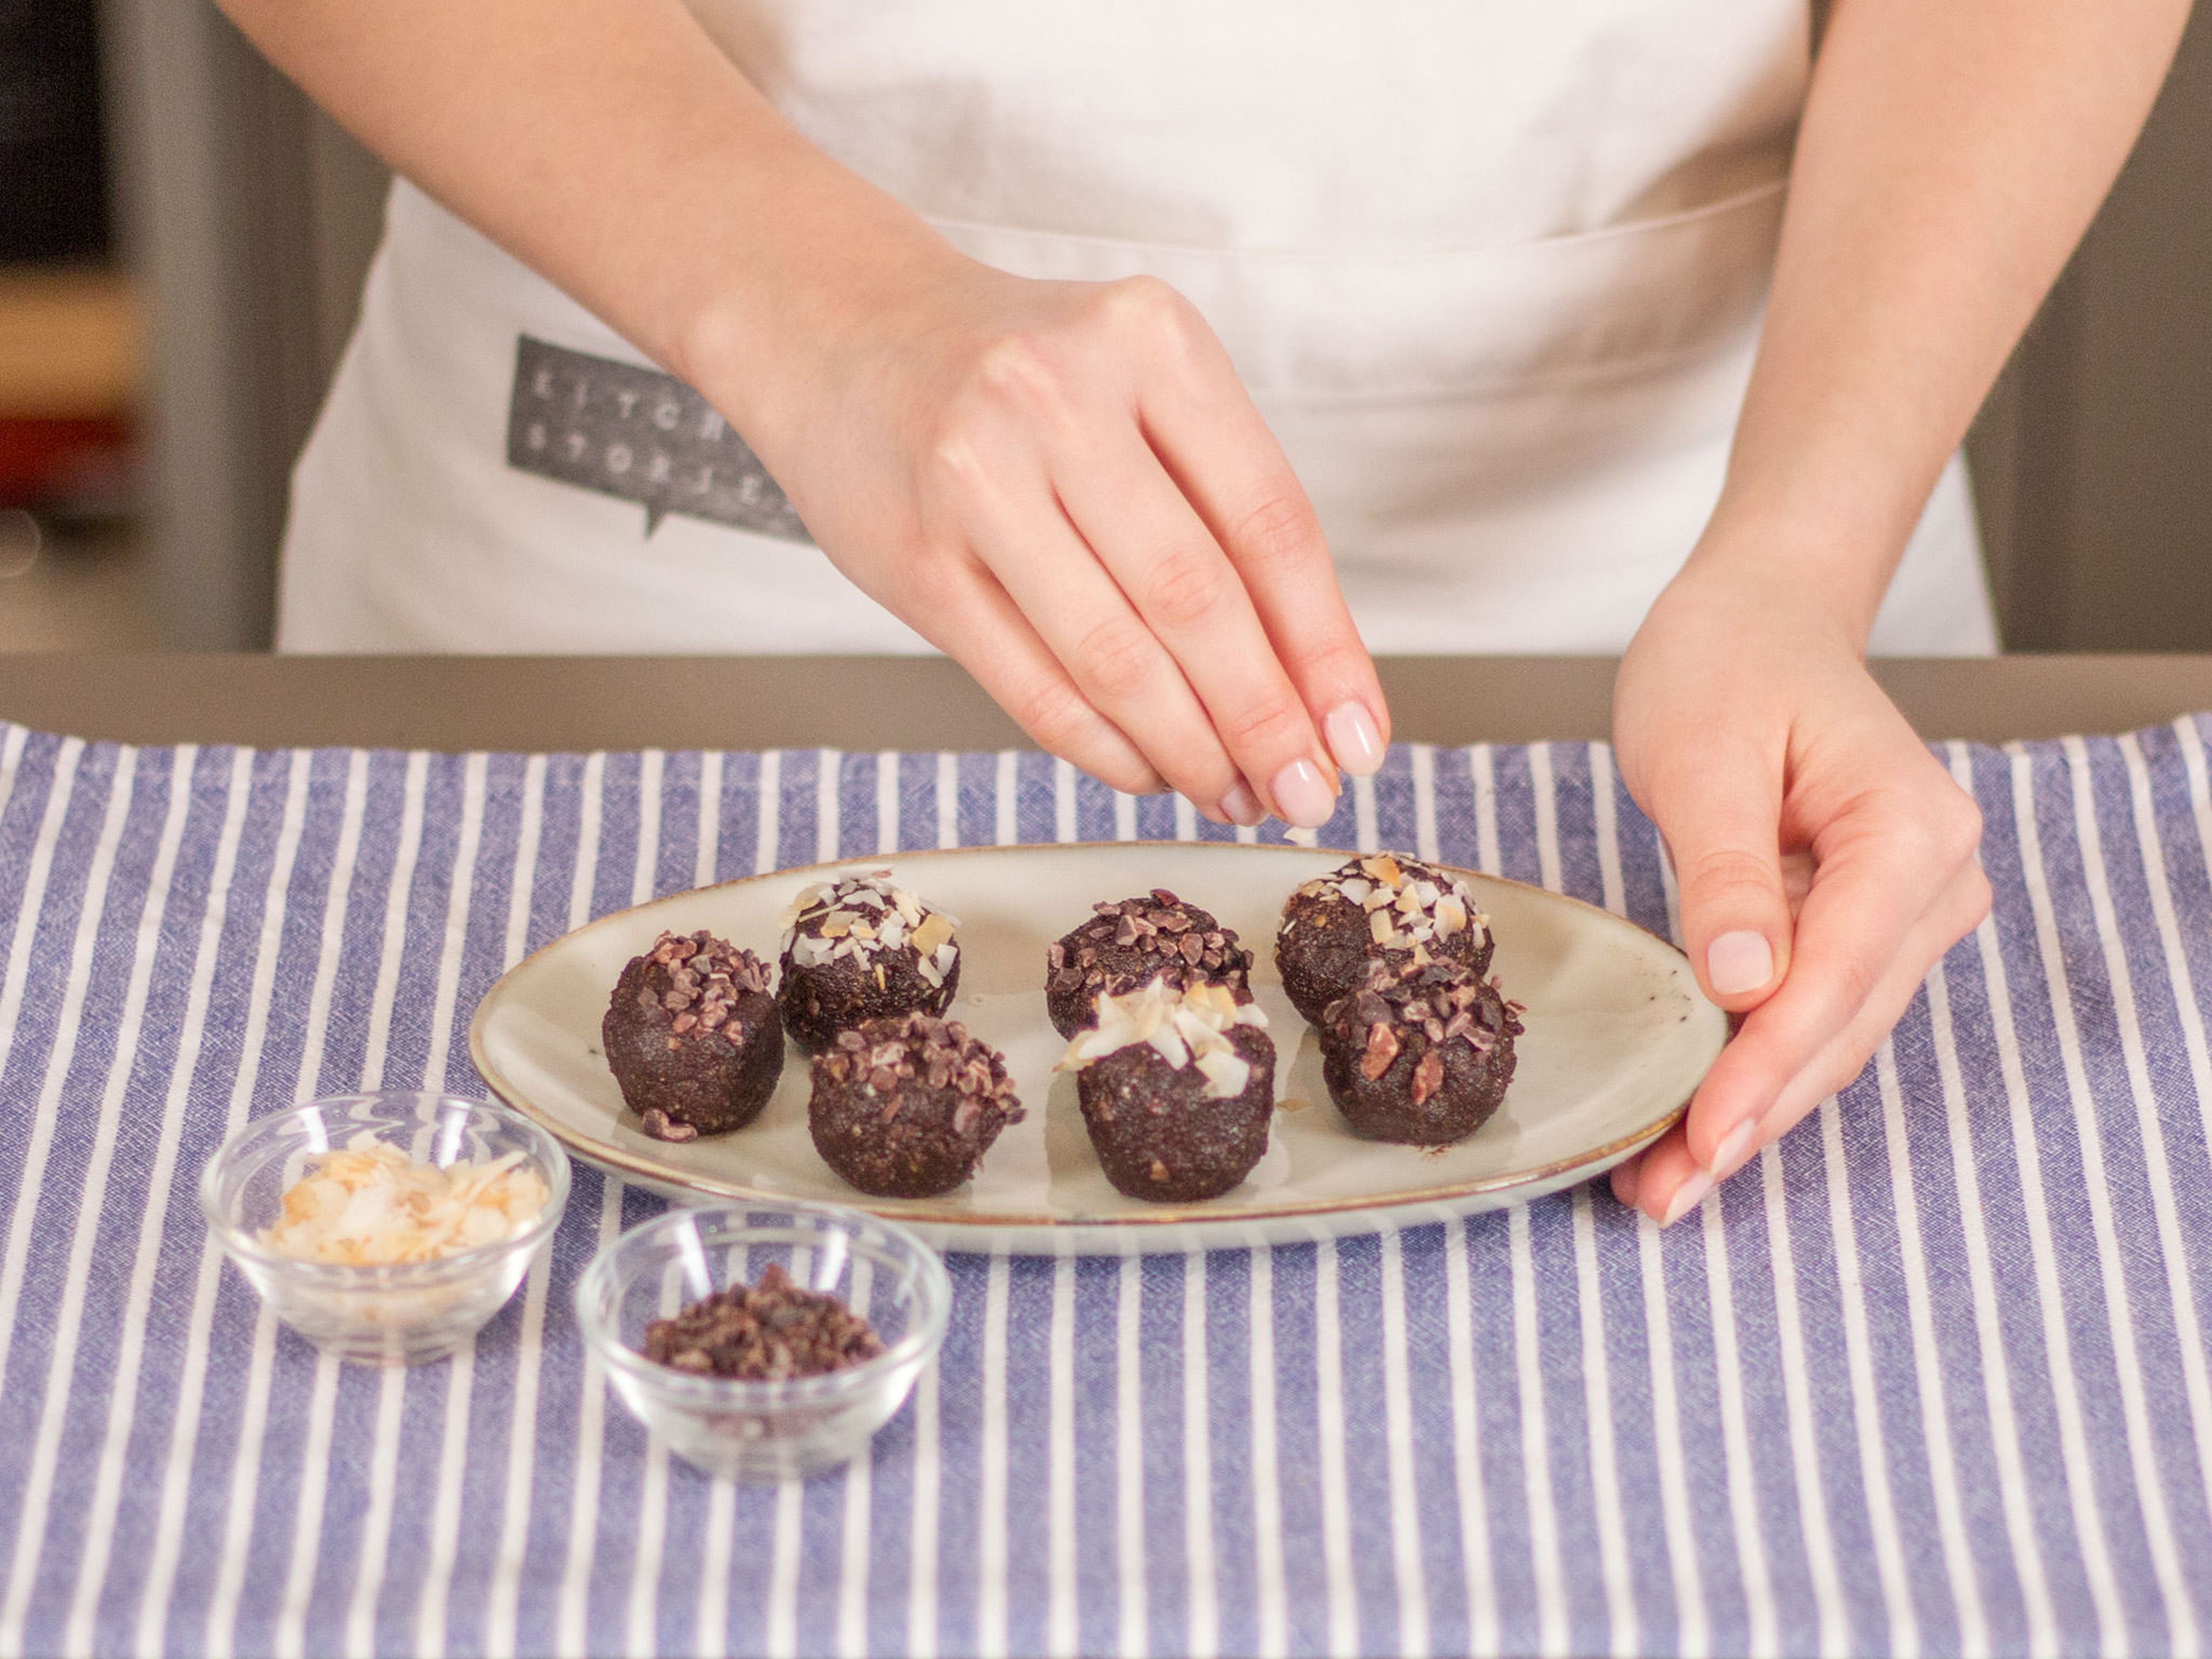 Take small portions of the dough (approx. 1.5 tbsp.) and roll each into a little ball. Sprinkle balls with remaining toasted coconut flakes and chocolate sprinkles. Enjoy!